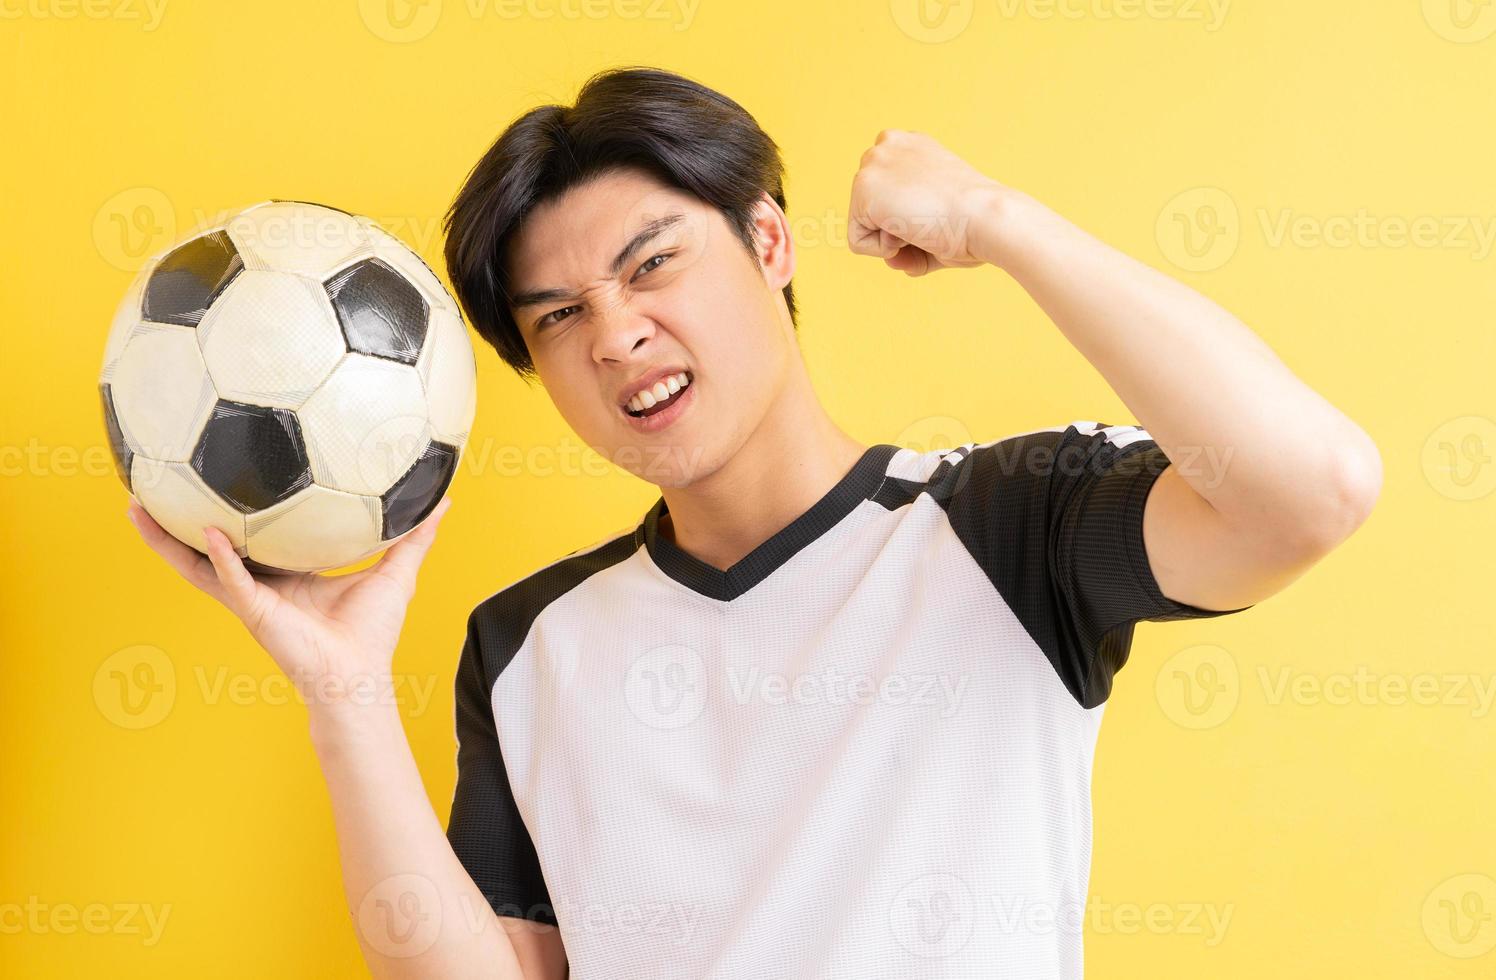 The Asian man is holding the ball and showing a triumphant expression photo